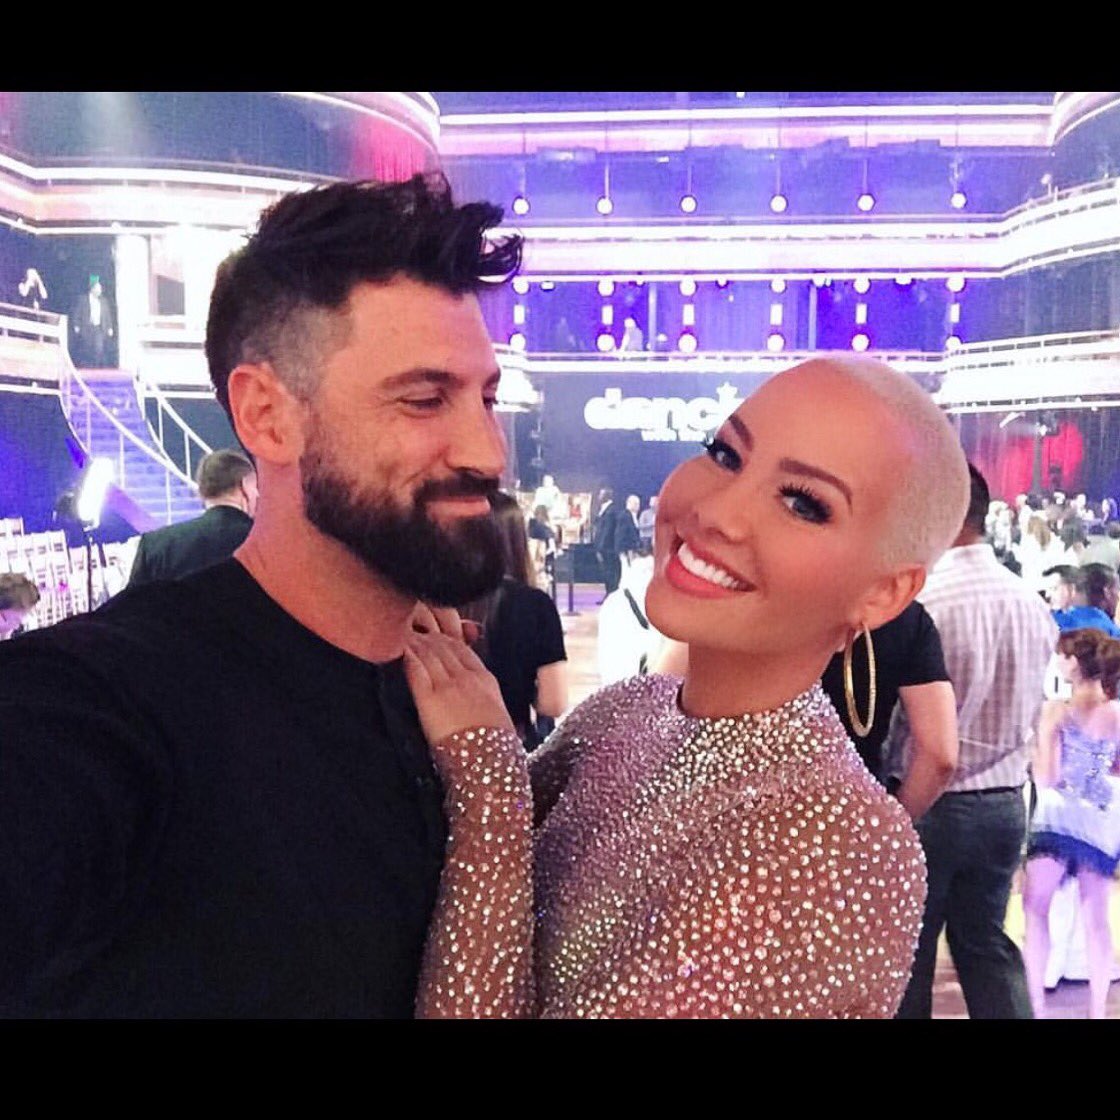 I couldn't have asked for a better partner and we'll only get better with time! @MaksimC ❤️❤️❤️ https://t.co/CmNkz7UWUq